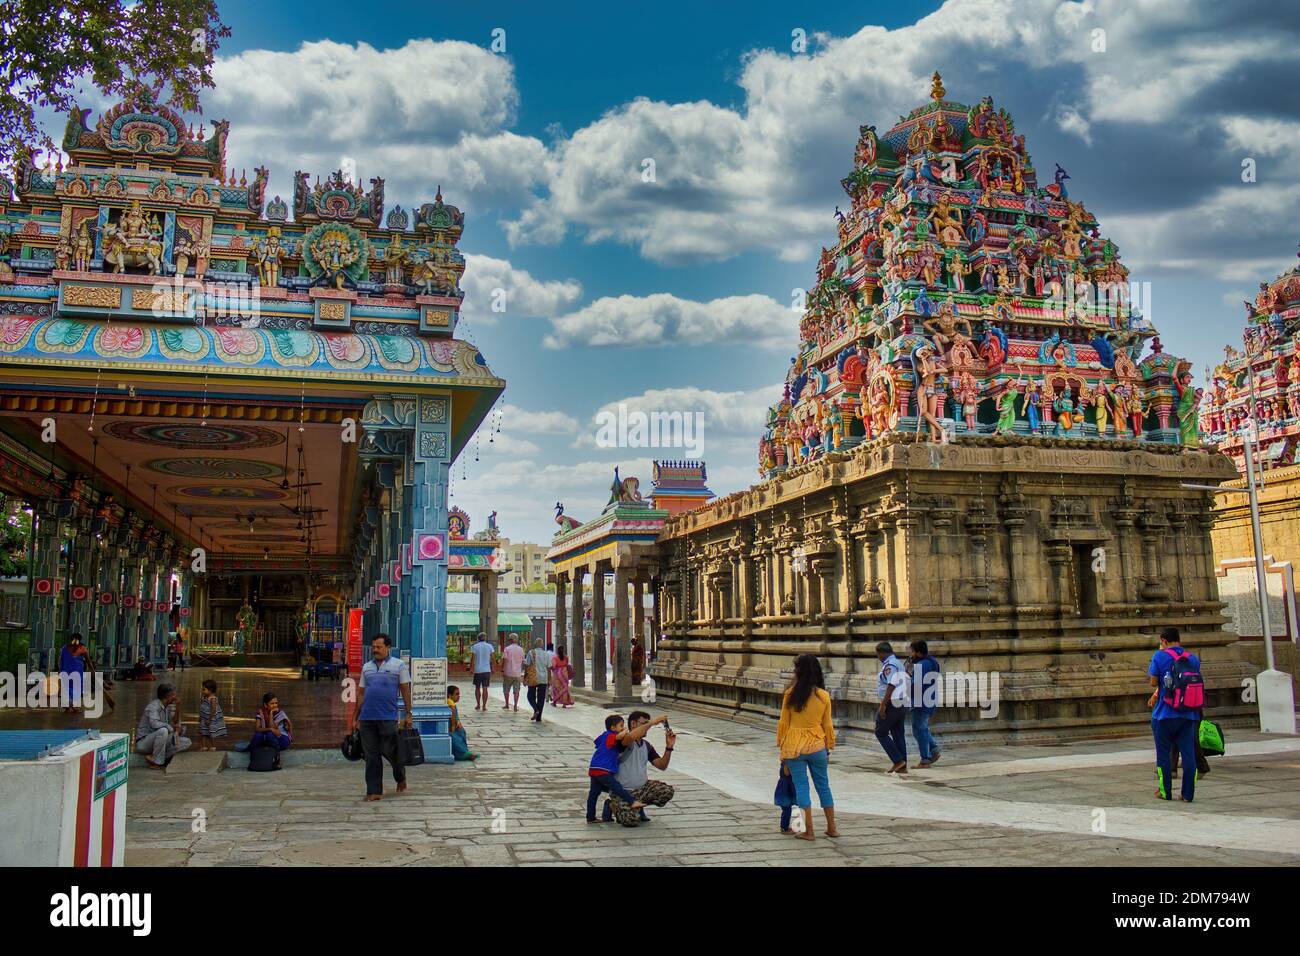 Chennai, India - October 27, 2018: Interior scene of Kapaleeswarar temple  is the chief landmark of Mylapore and one of the popular and prominent  Hindu Stock Photo - Alamy